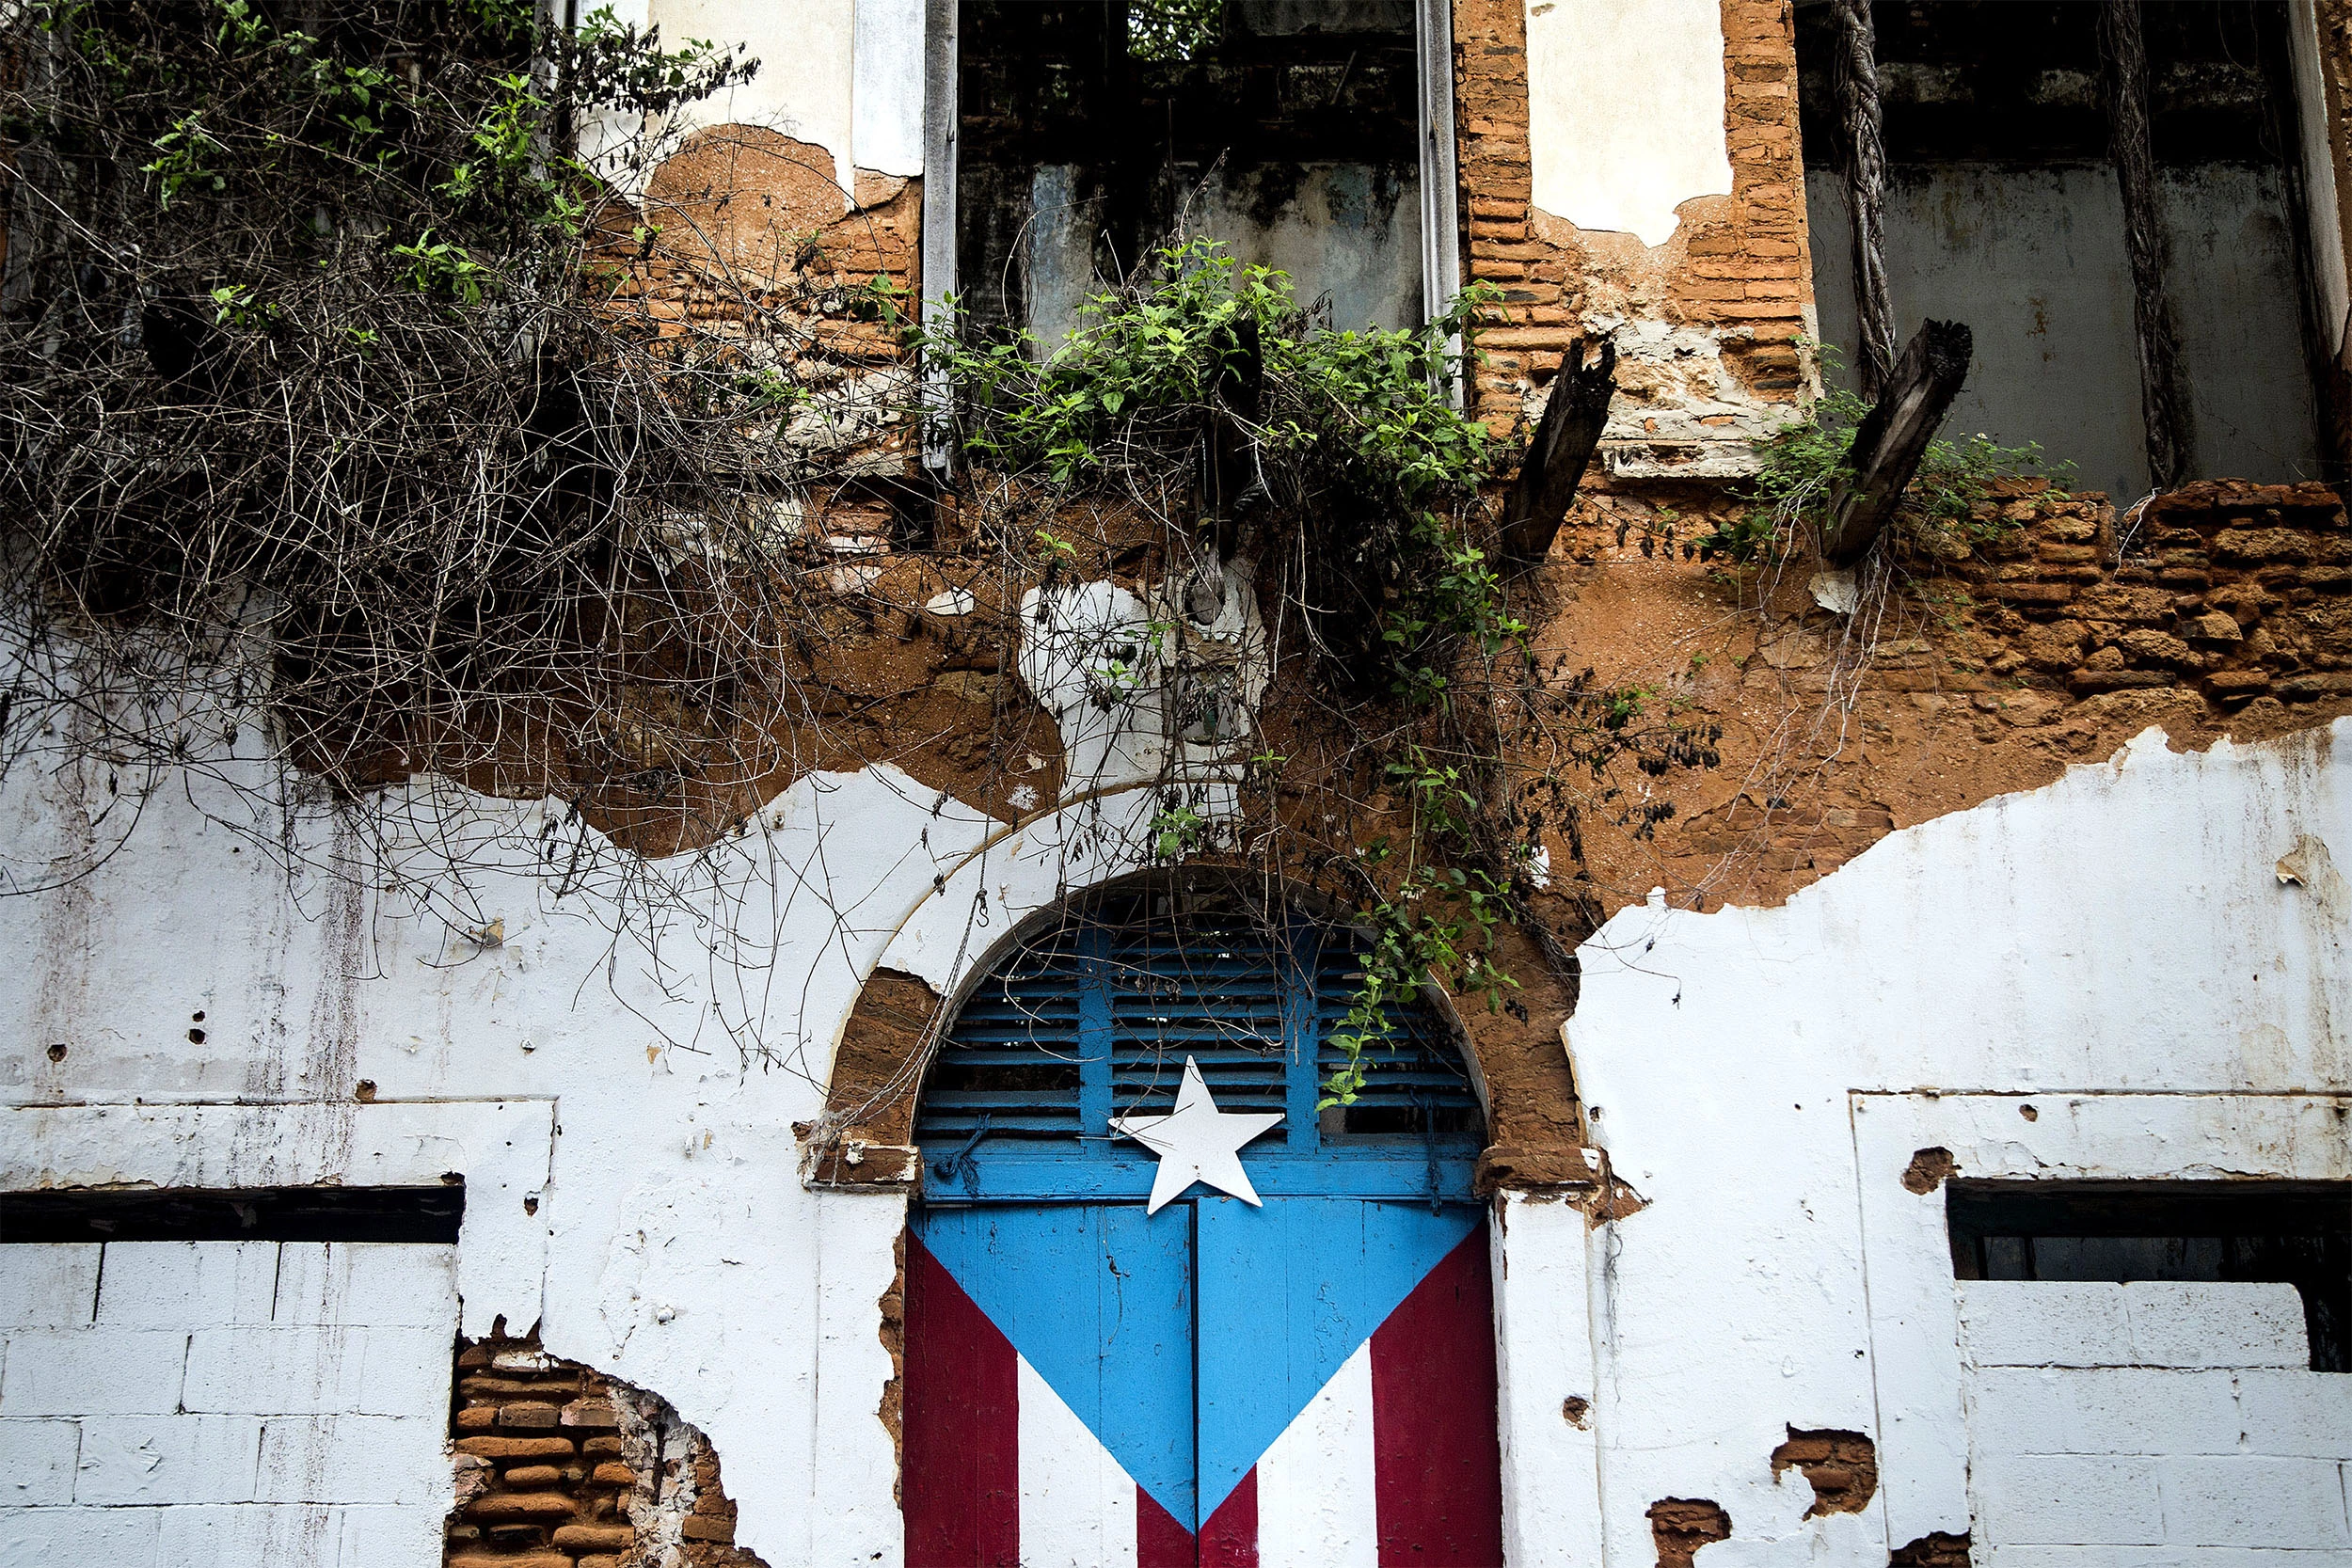 A Puerto Rican flag is painted on the doorway of an abandoned building in San Juan, Puerto Rico, on May 1, 2016.